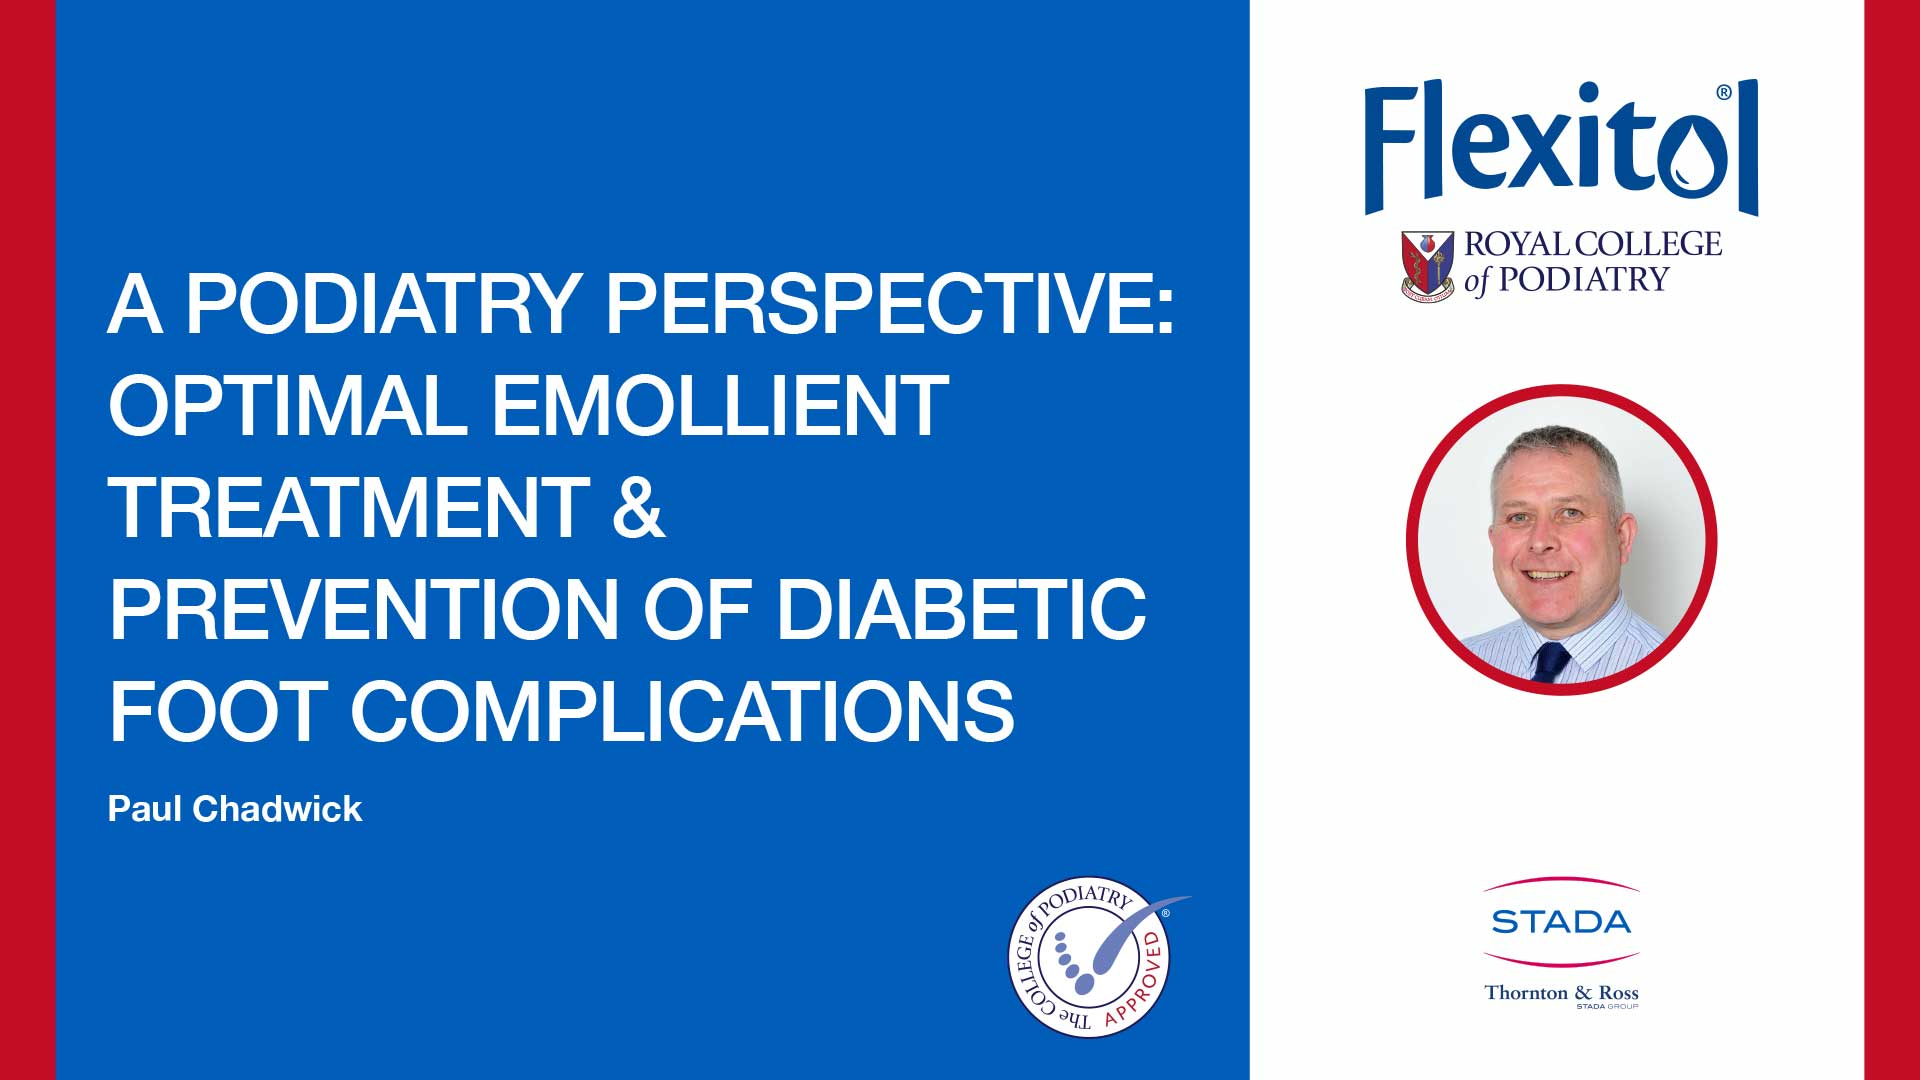    A podiatry perspective - Optimal emollient treatment & prevention of diabetic foot complications